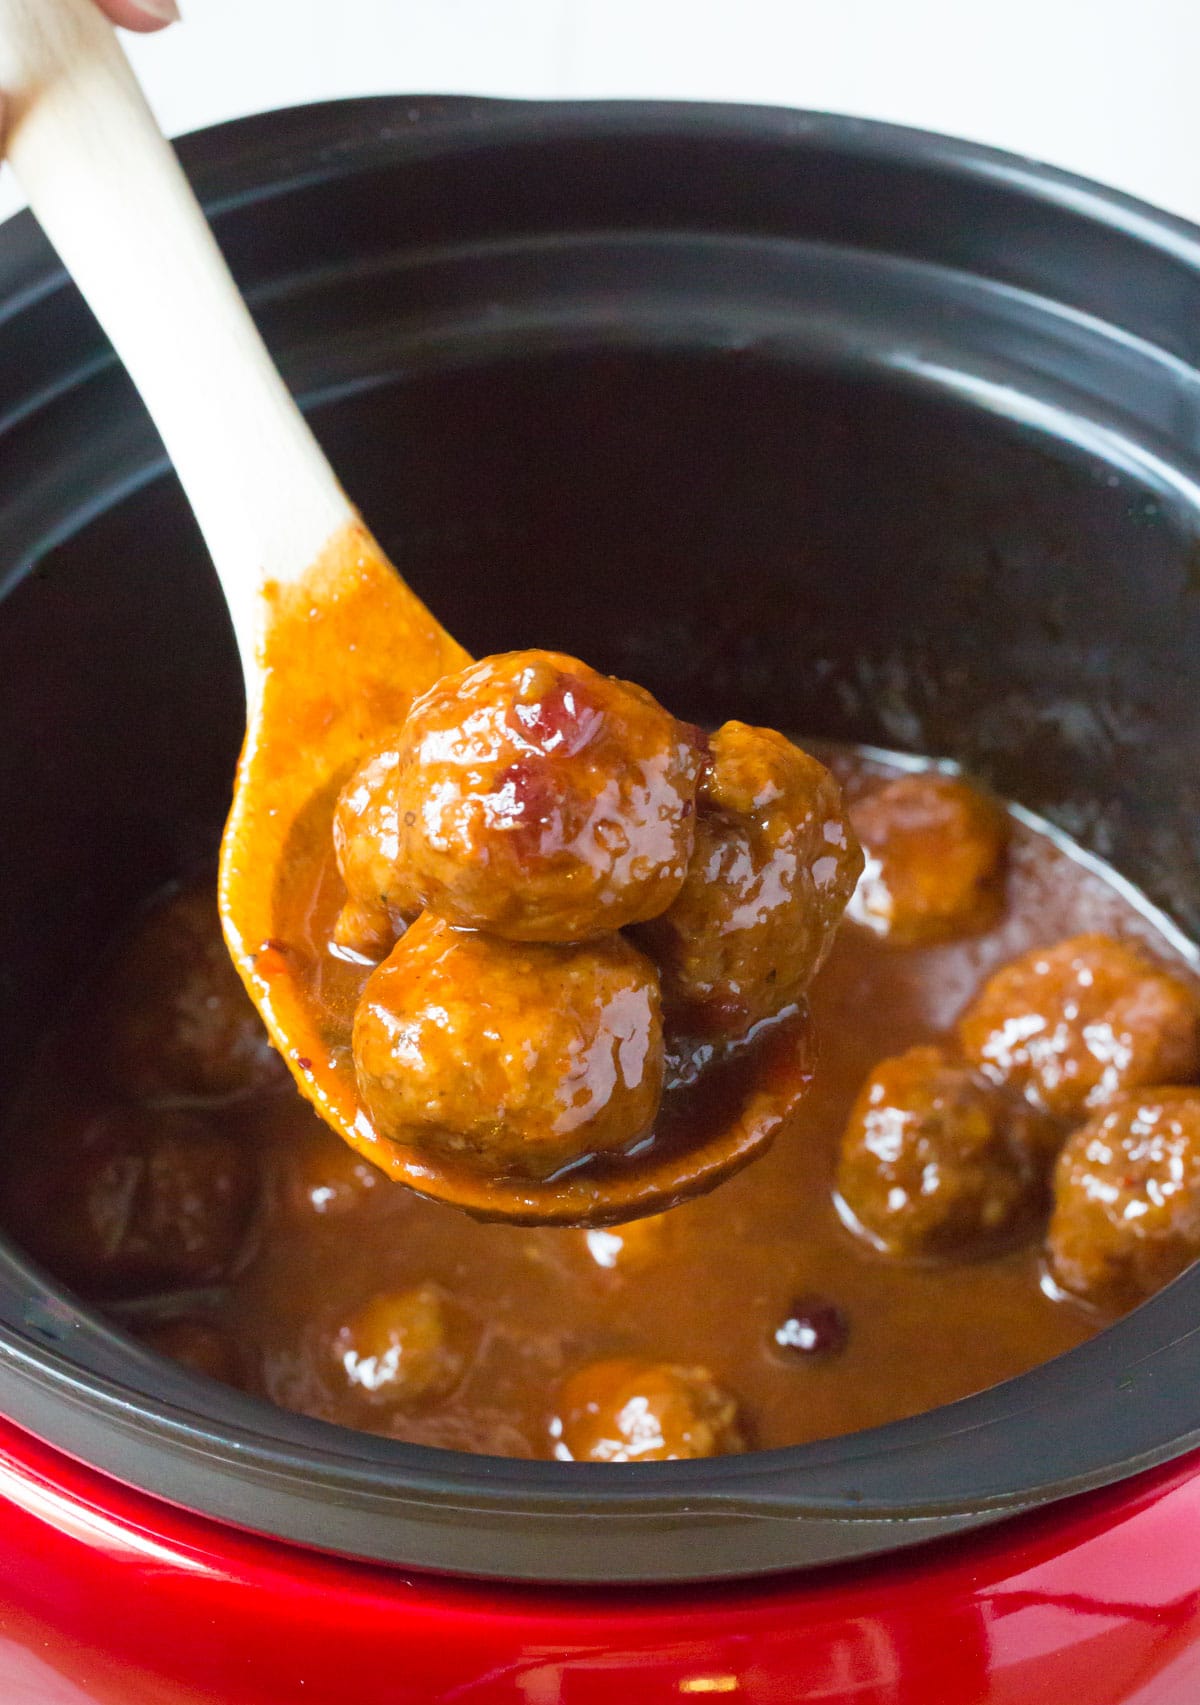 Last and final look at this slow cooker recipe with the meat and sauce on a wooden spoon
